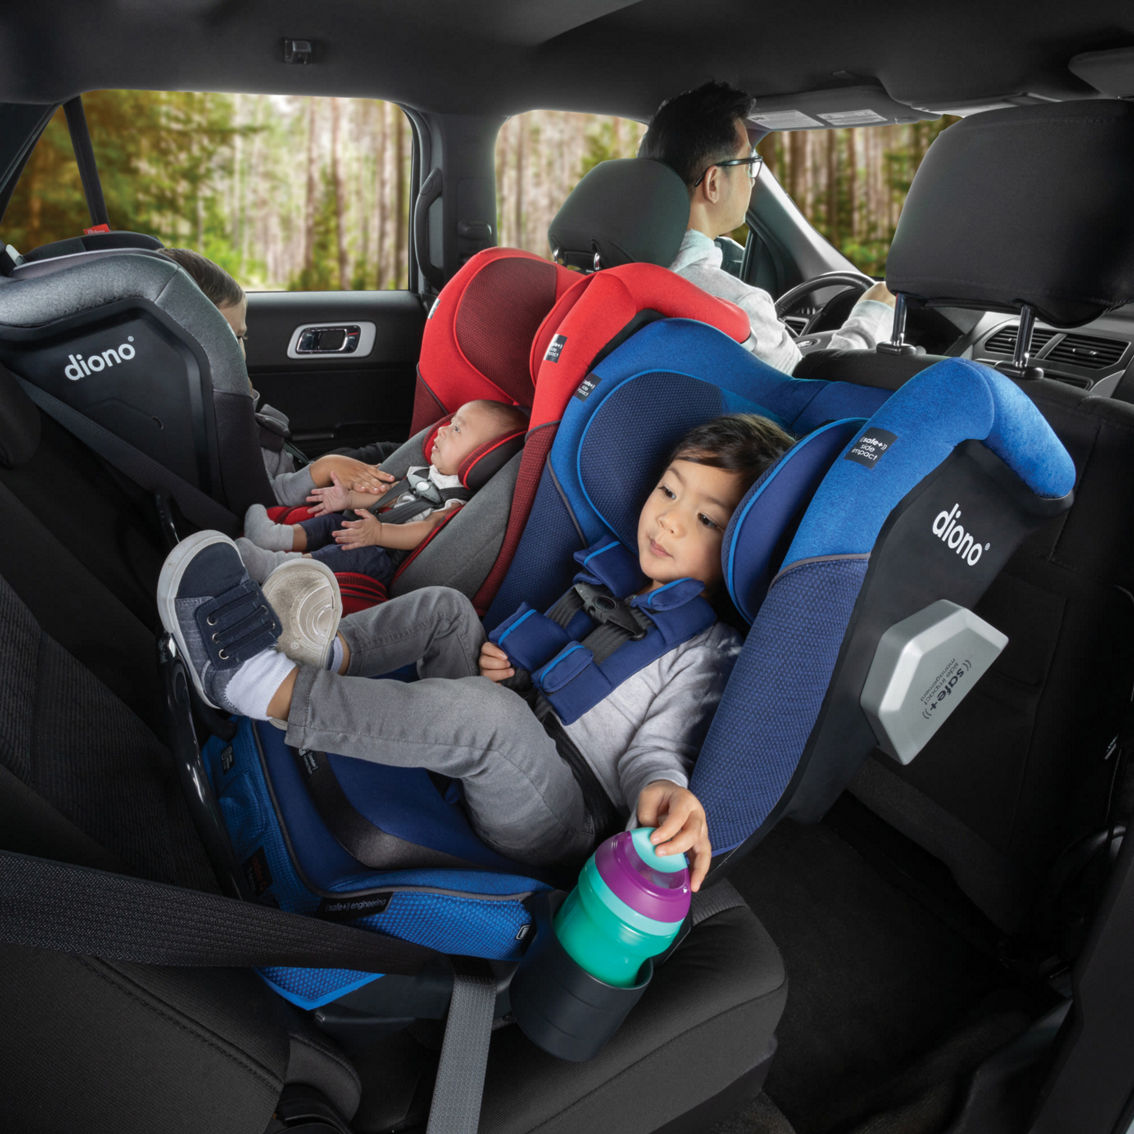 Diono Radian® 3QXT® SafePlus™ All-in-One Convertible Car Seat Black Jet - Image 5 of 5